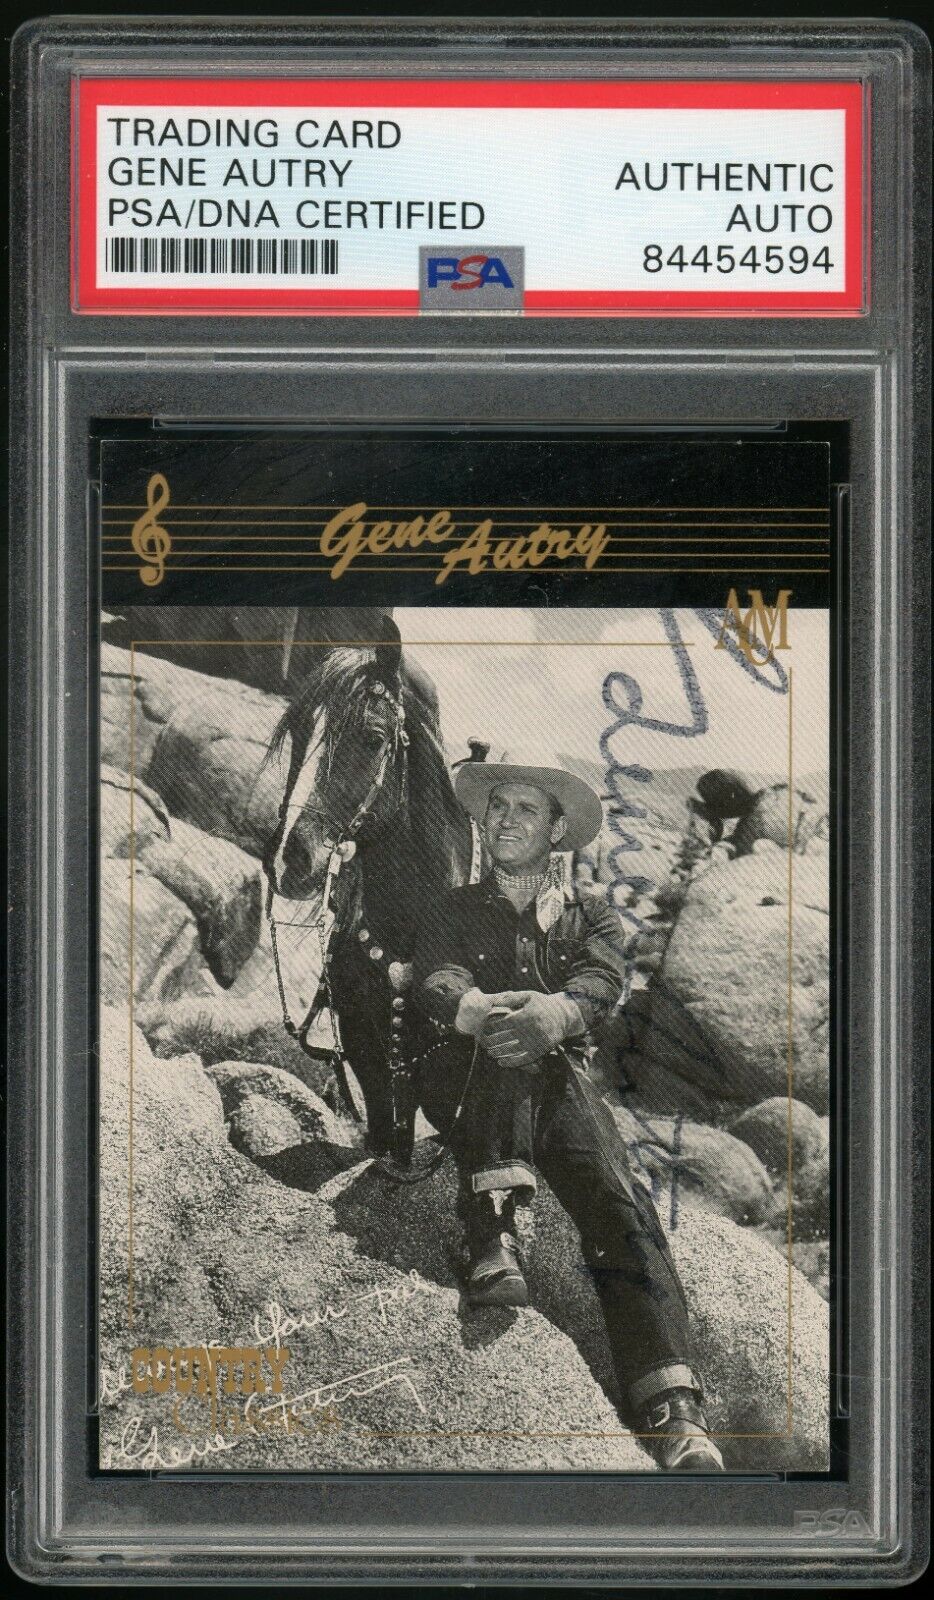 GENE AUTRY 1992 Collect-a-Card Country Music 35 PSA/DNA Certified Authentic Auto